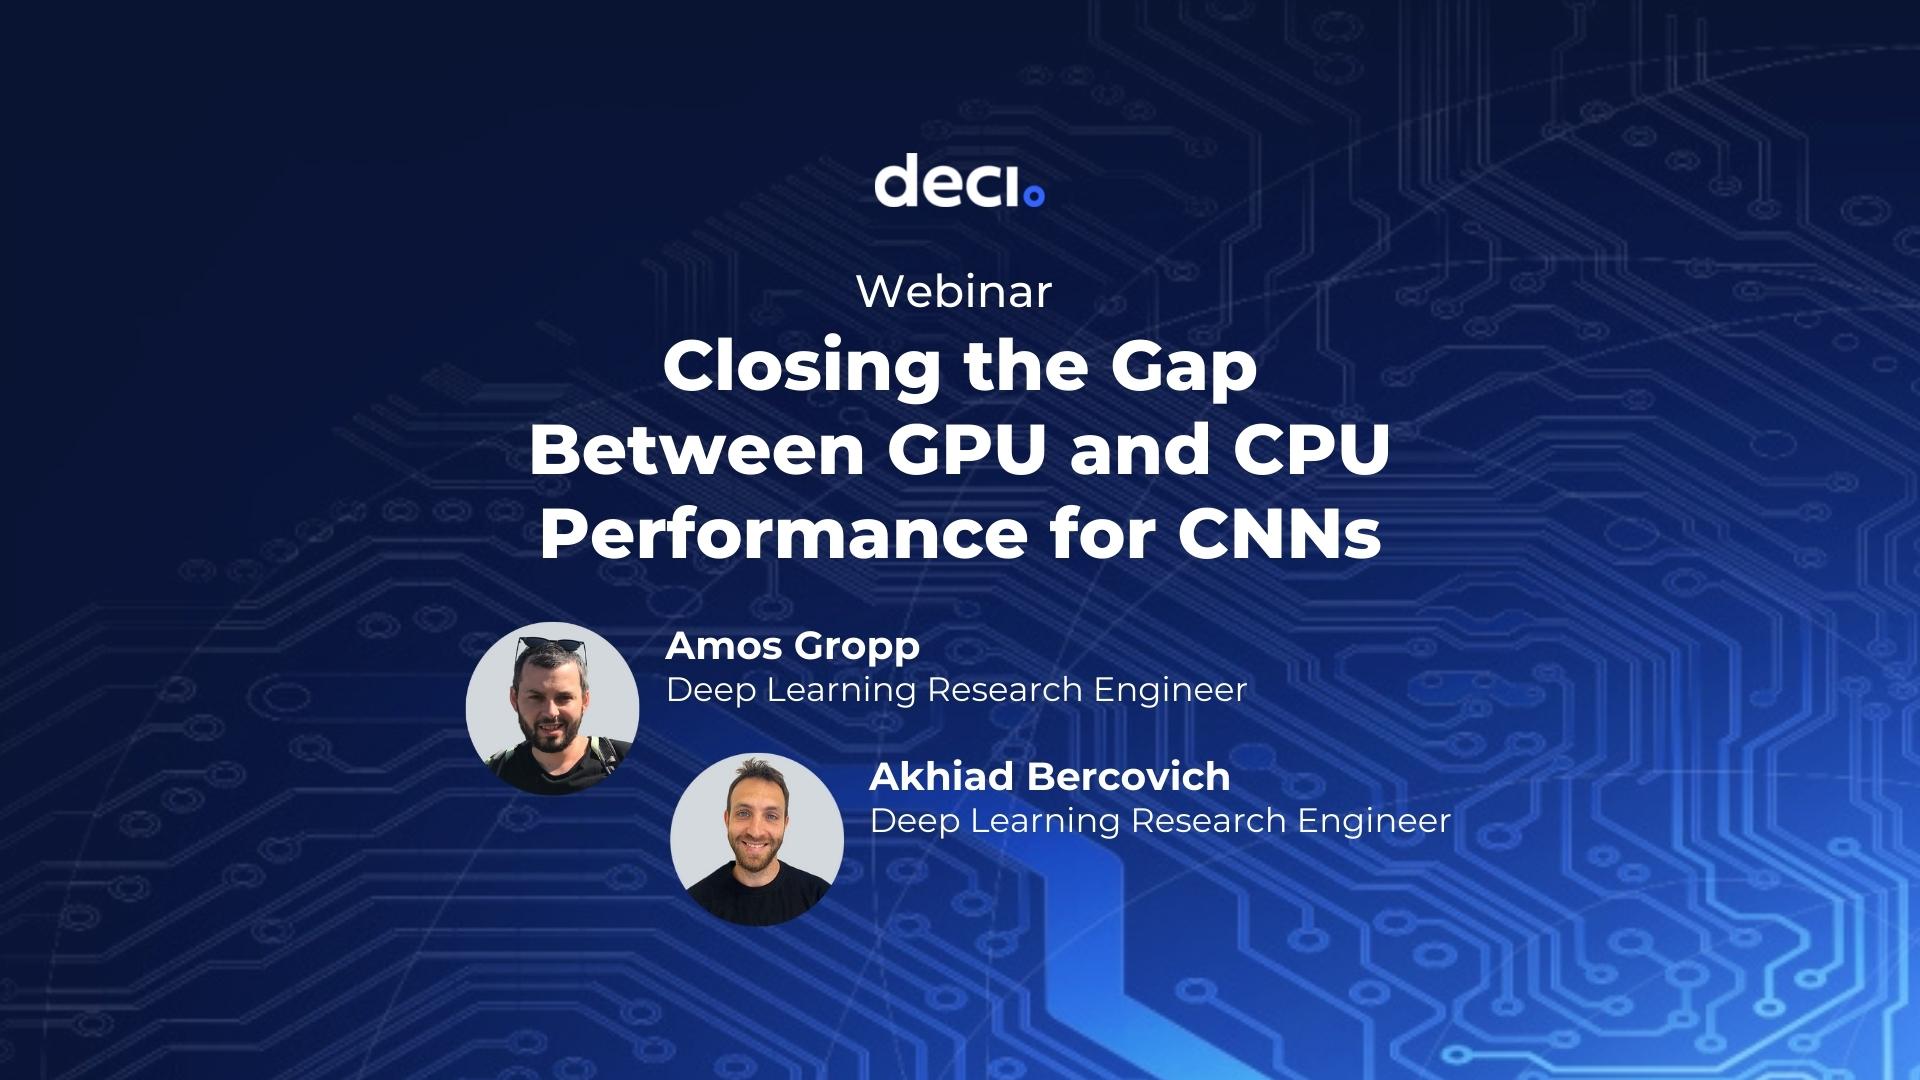 Banner with title "Closing the Gap Between GPU and CPU Performance for CNNS"